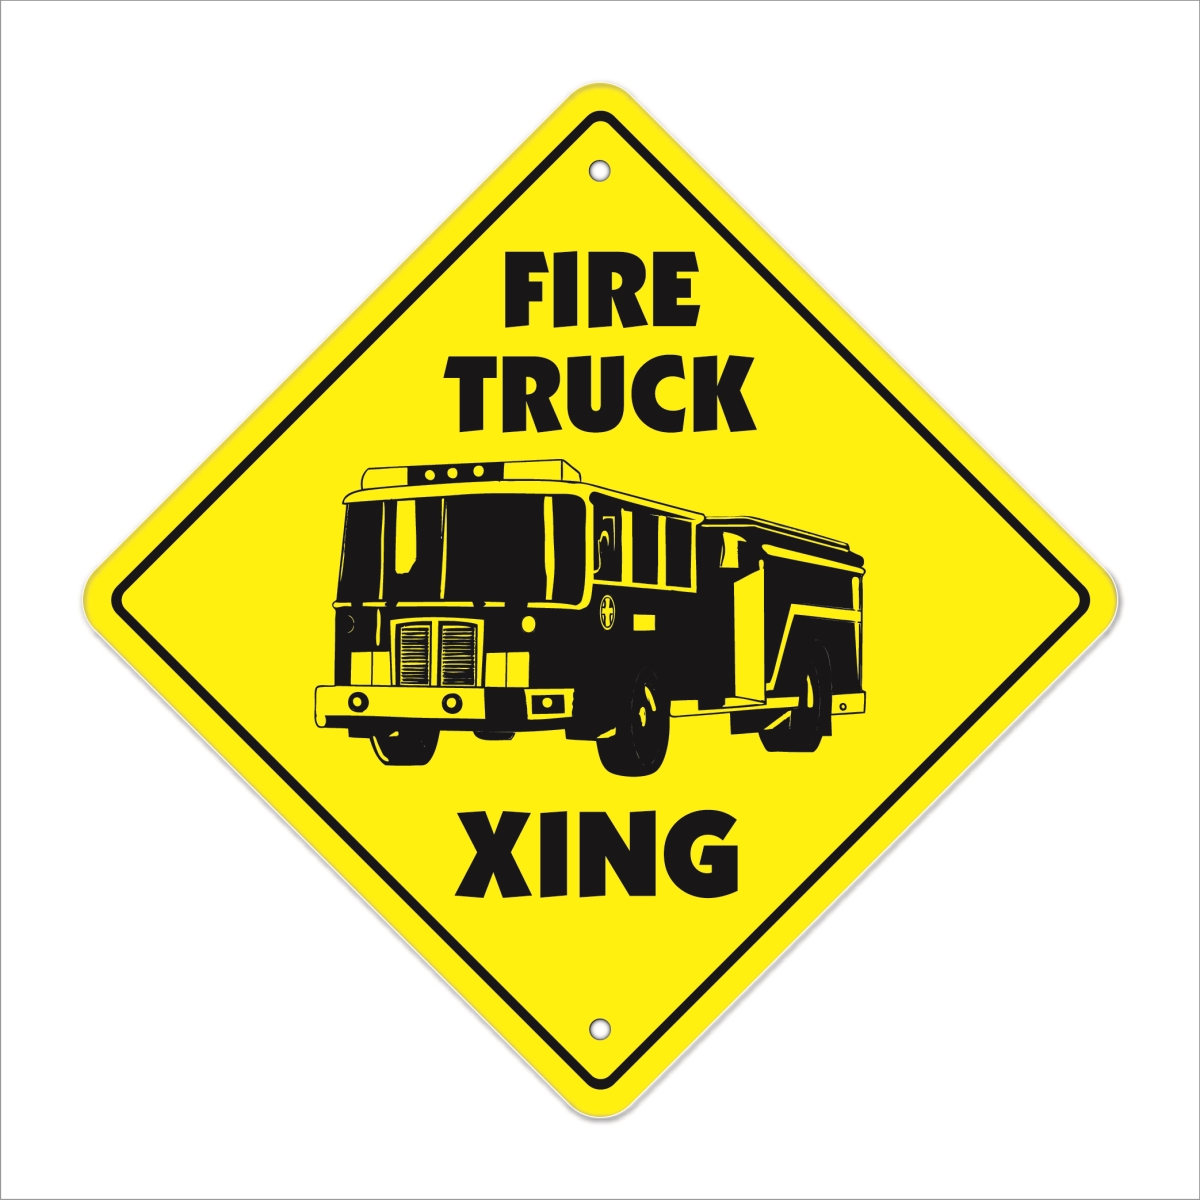 SignMission X-FireTruck 12 x 12 in. Firetruck Crossing Zone Xing Sign